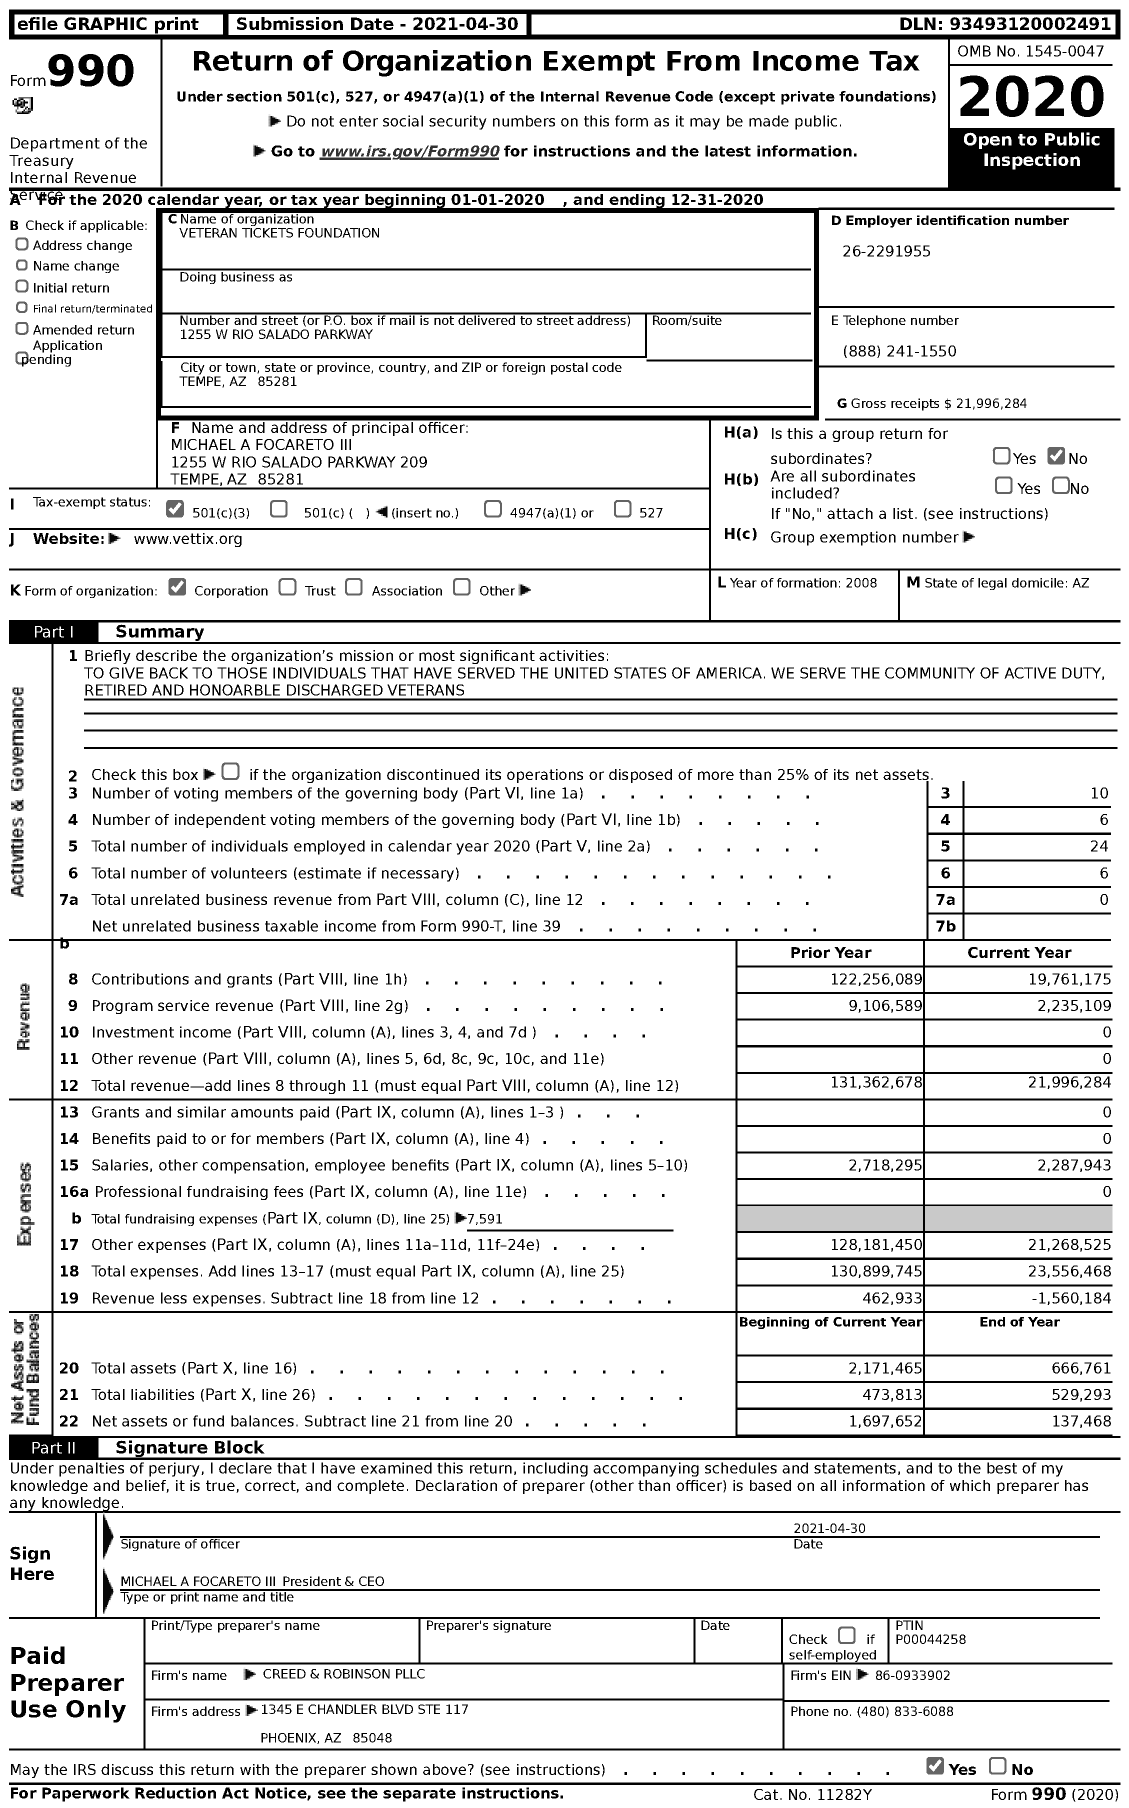 Image of first page of 2020 Form 990 for Veteran Tickets Foundation (VTF)